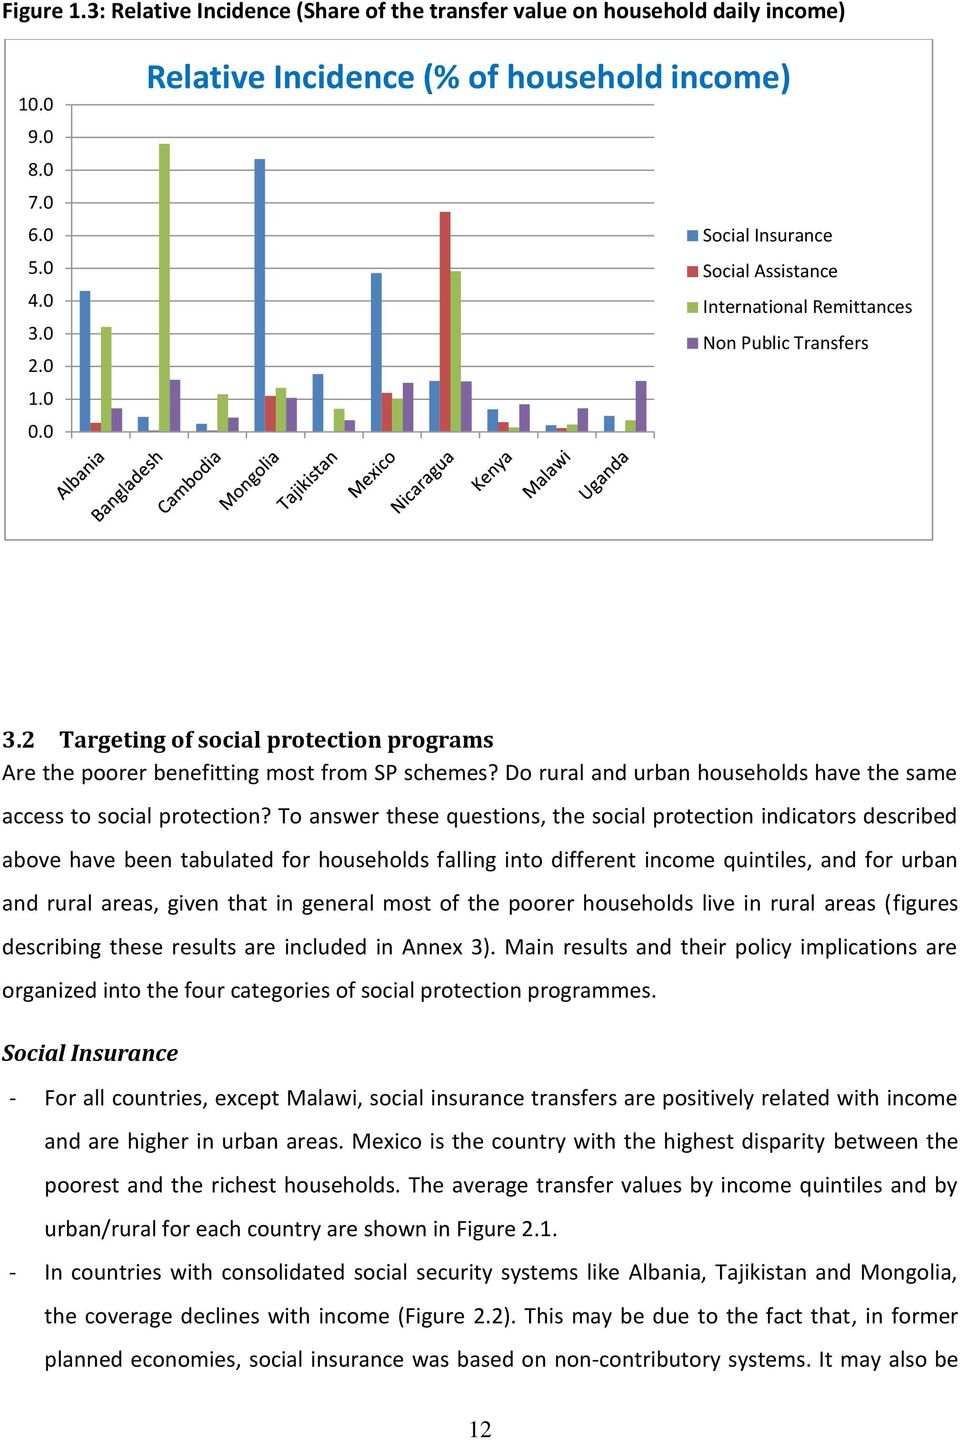 2 Targeting of social protection programs Are the poorer benefitting most from SP schemes? Do rural and urban households have the same access to social protection?